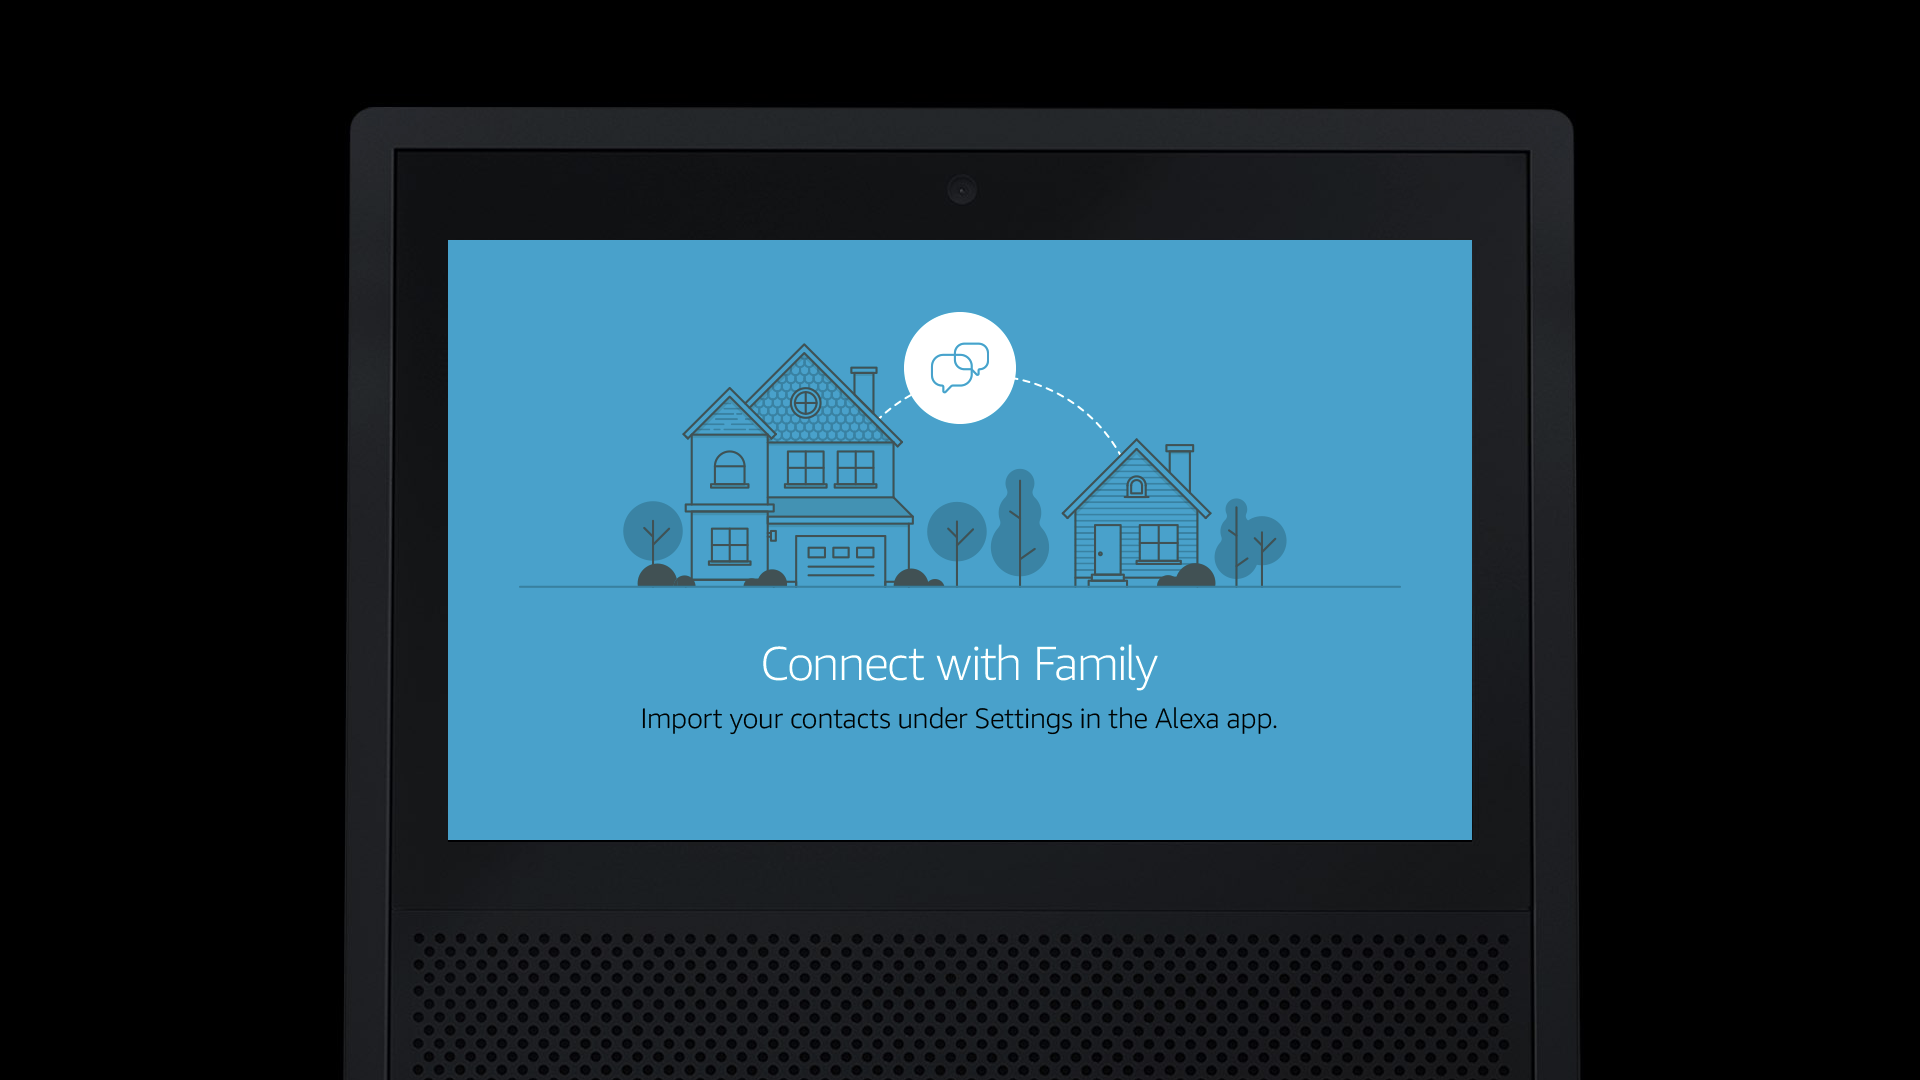 Echo Show screen highlighting features.